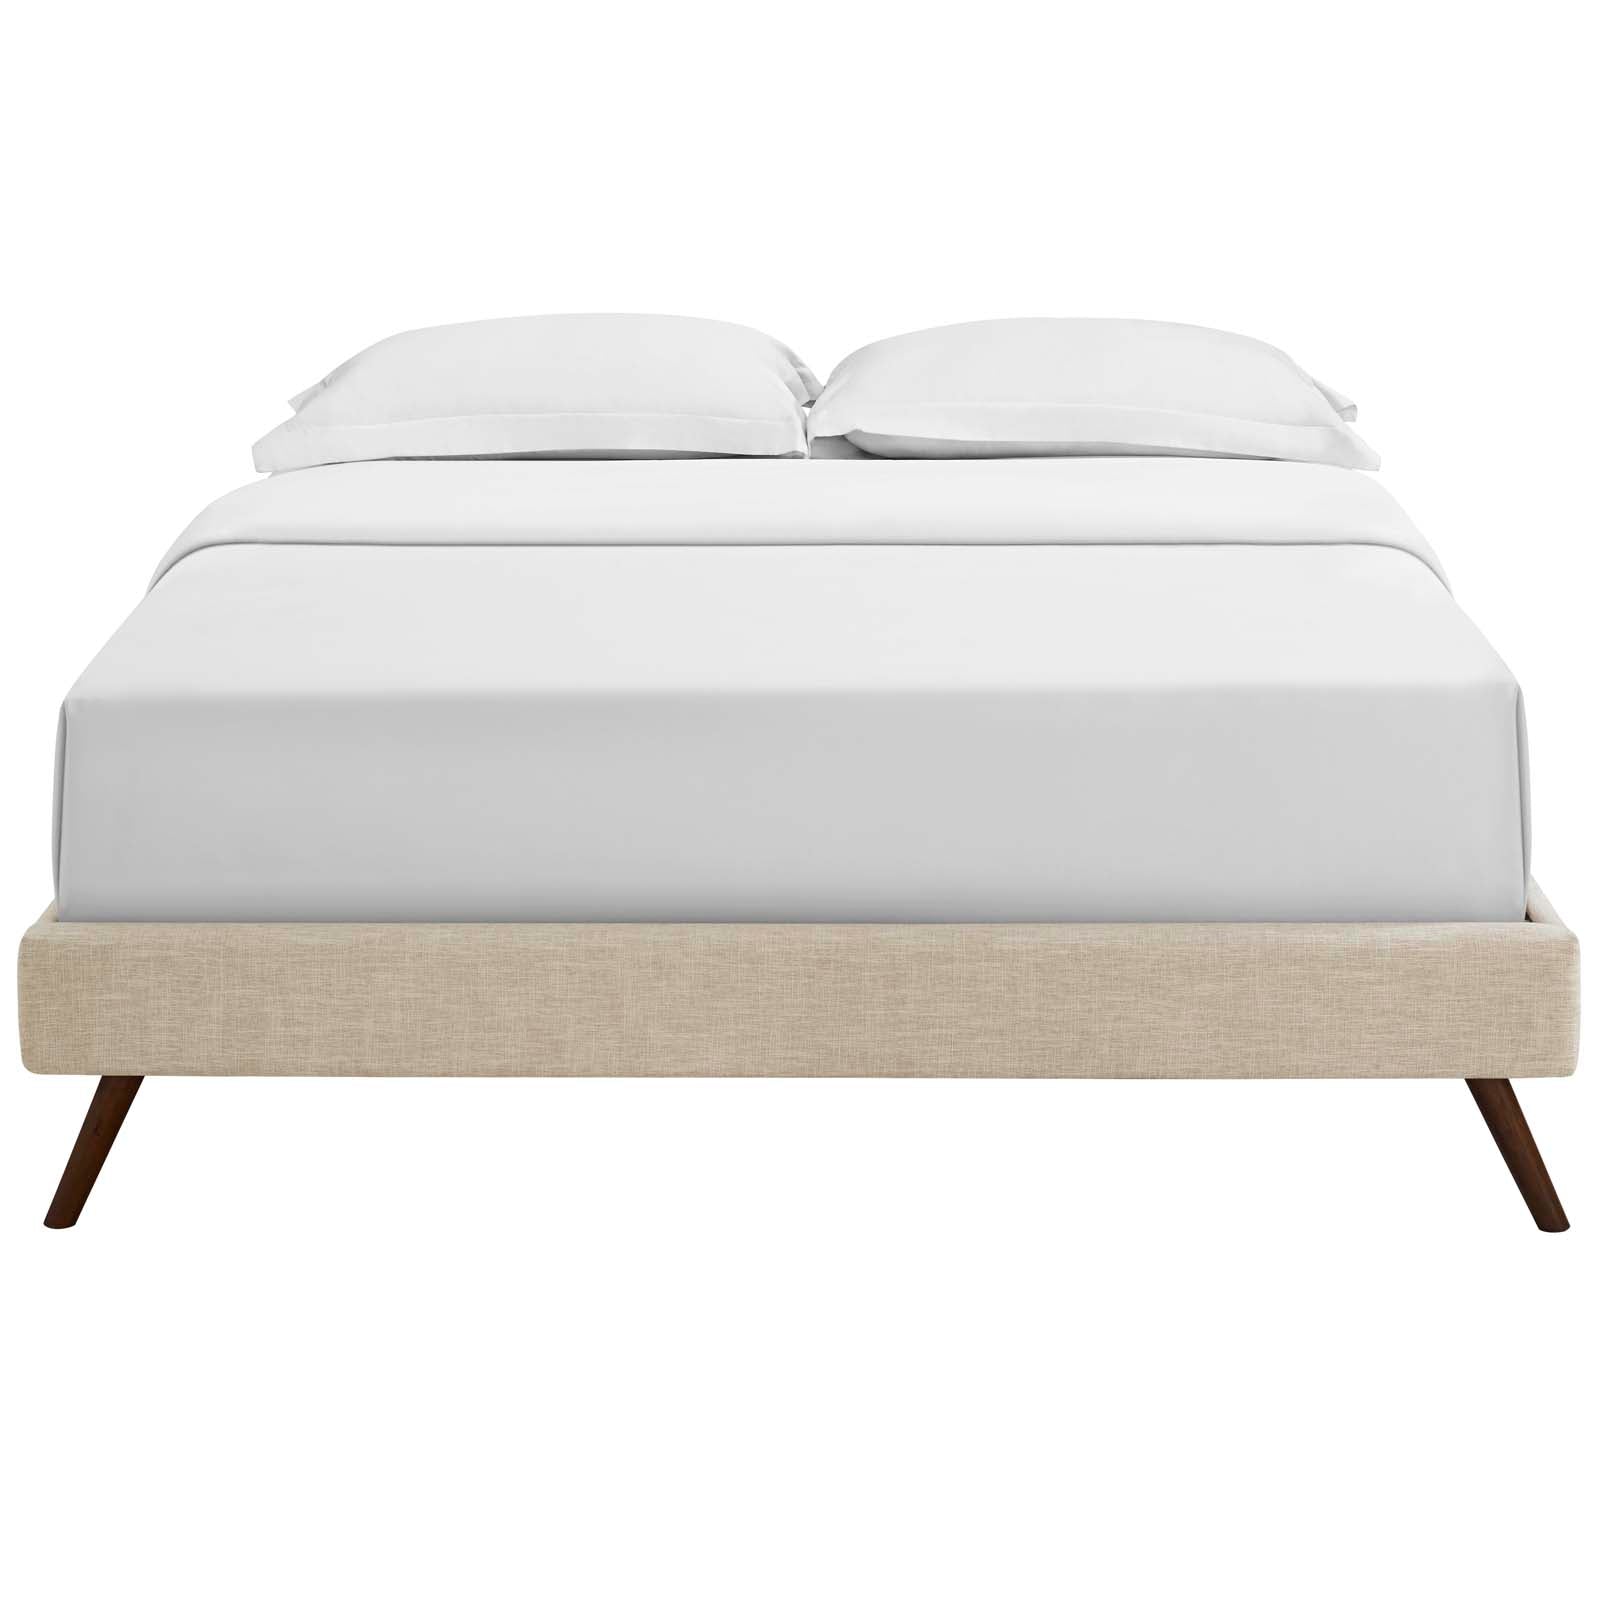 Modway Beds - Loryn Queen Fabric Bed Frame with Round Splayed Legs Beige